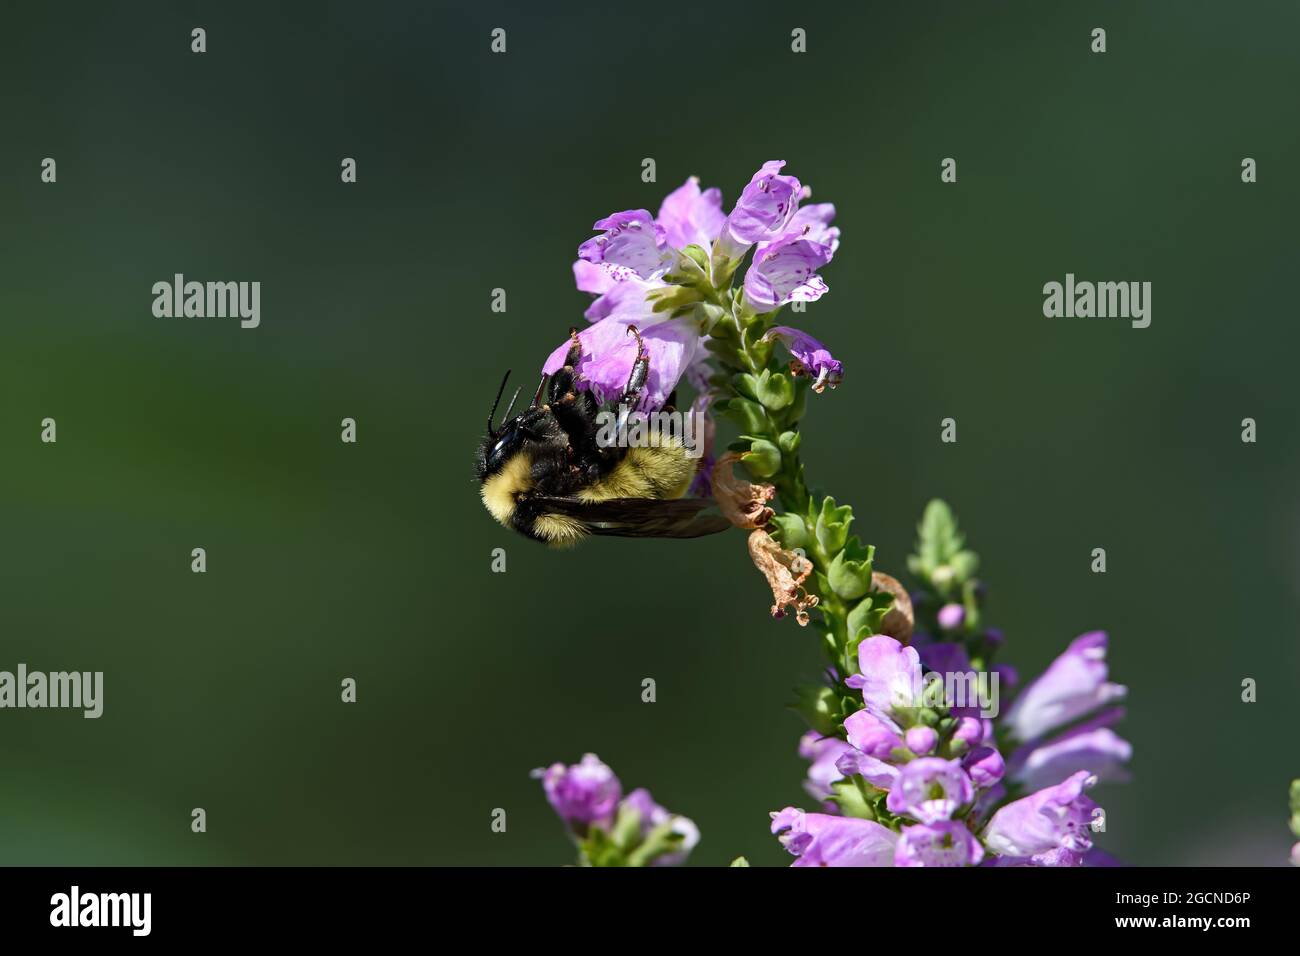 Bumblebee which is a member of the genus Bombus, part of Apidae on obedient plant flower. Stock Photo